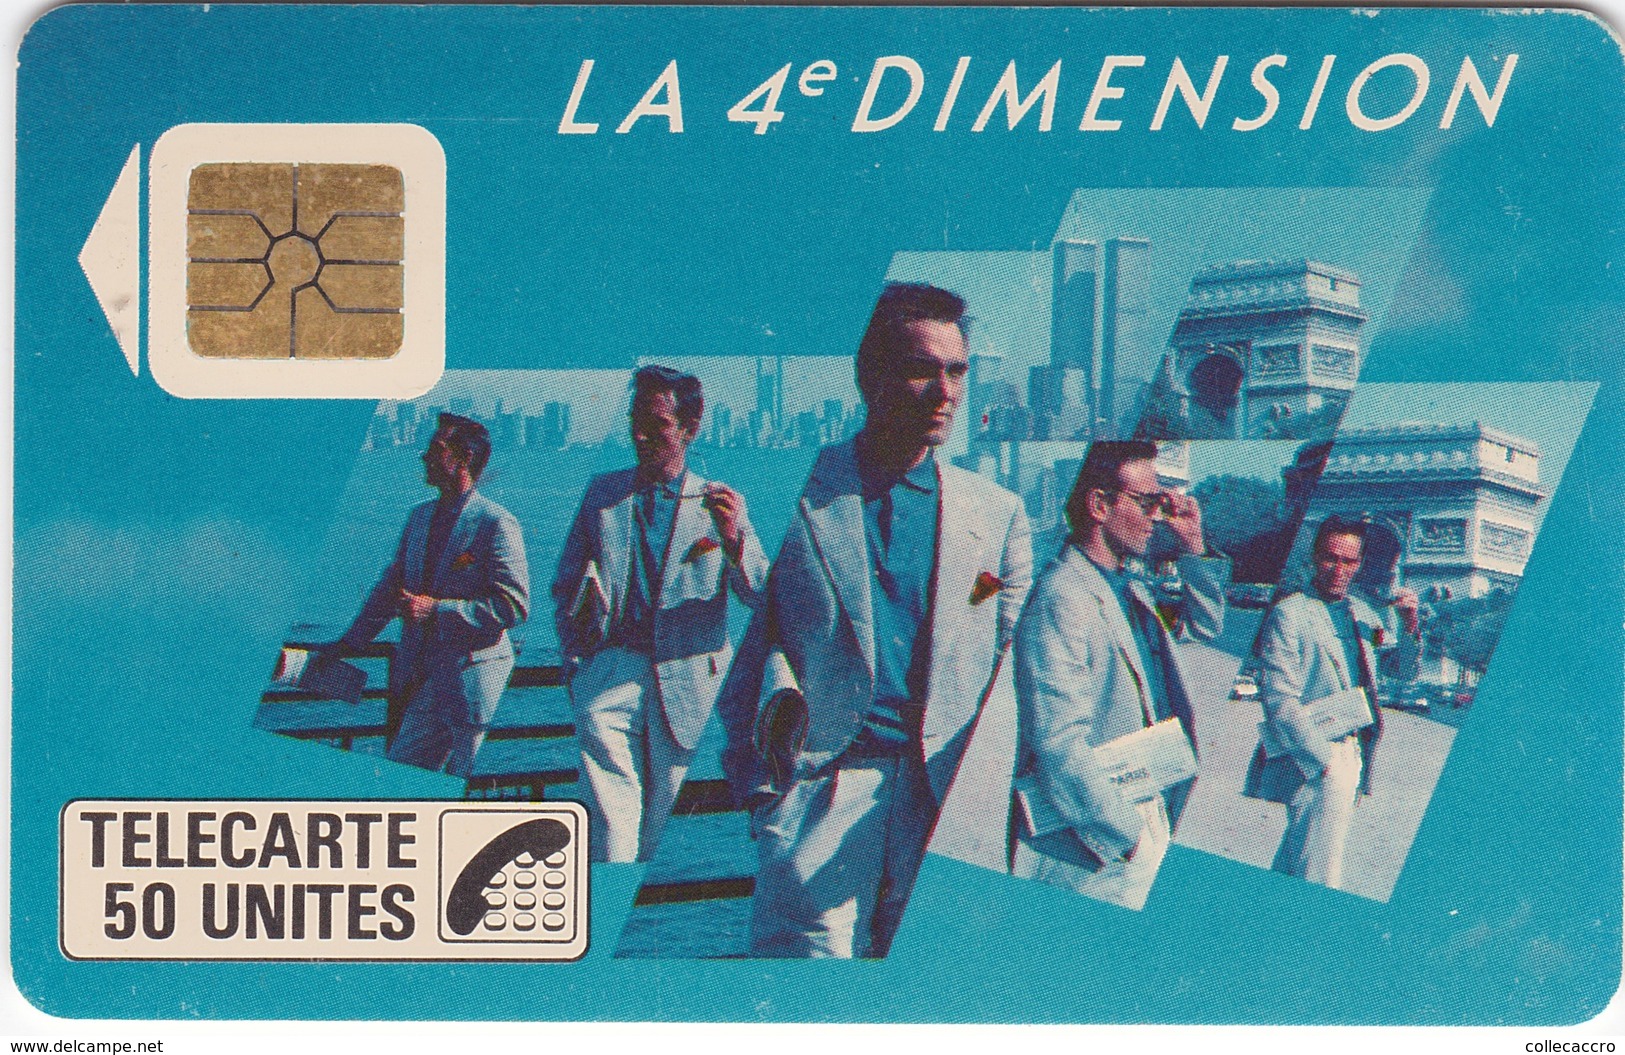 F38 DIMENSION HOMMES - 1988